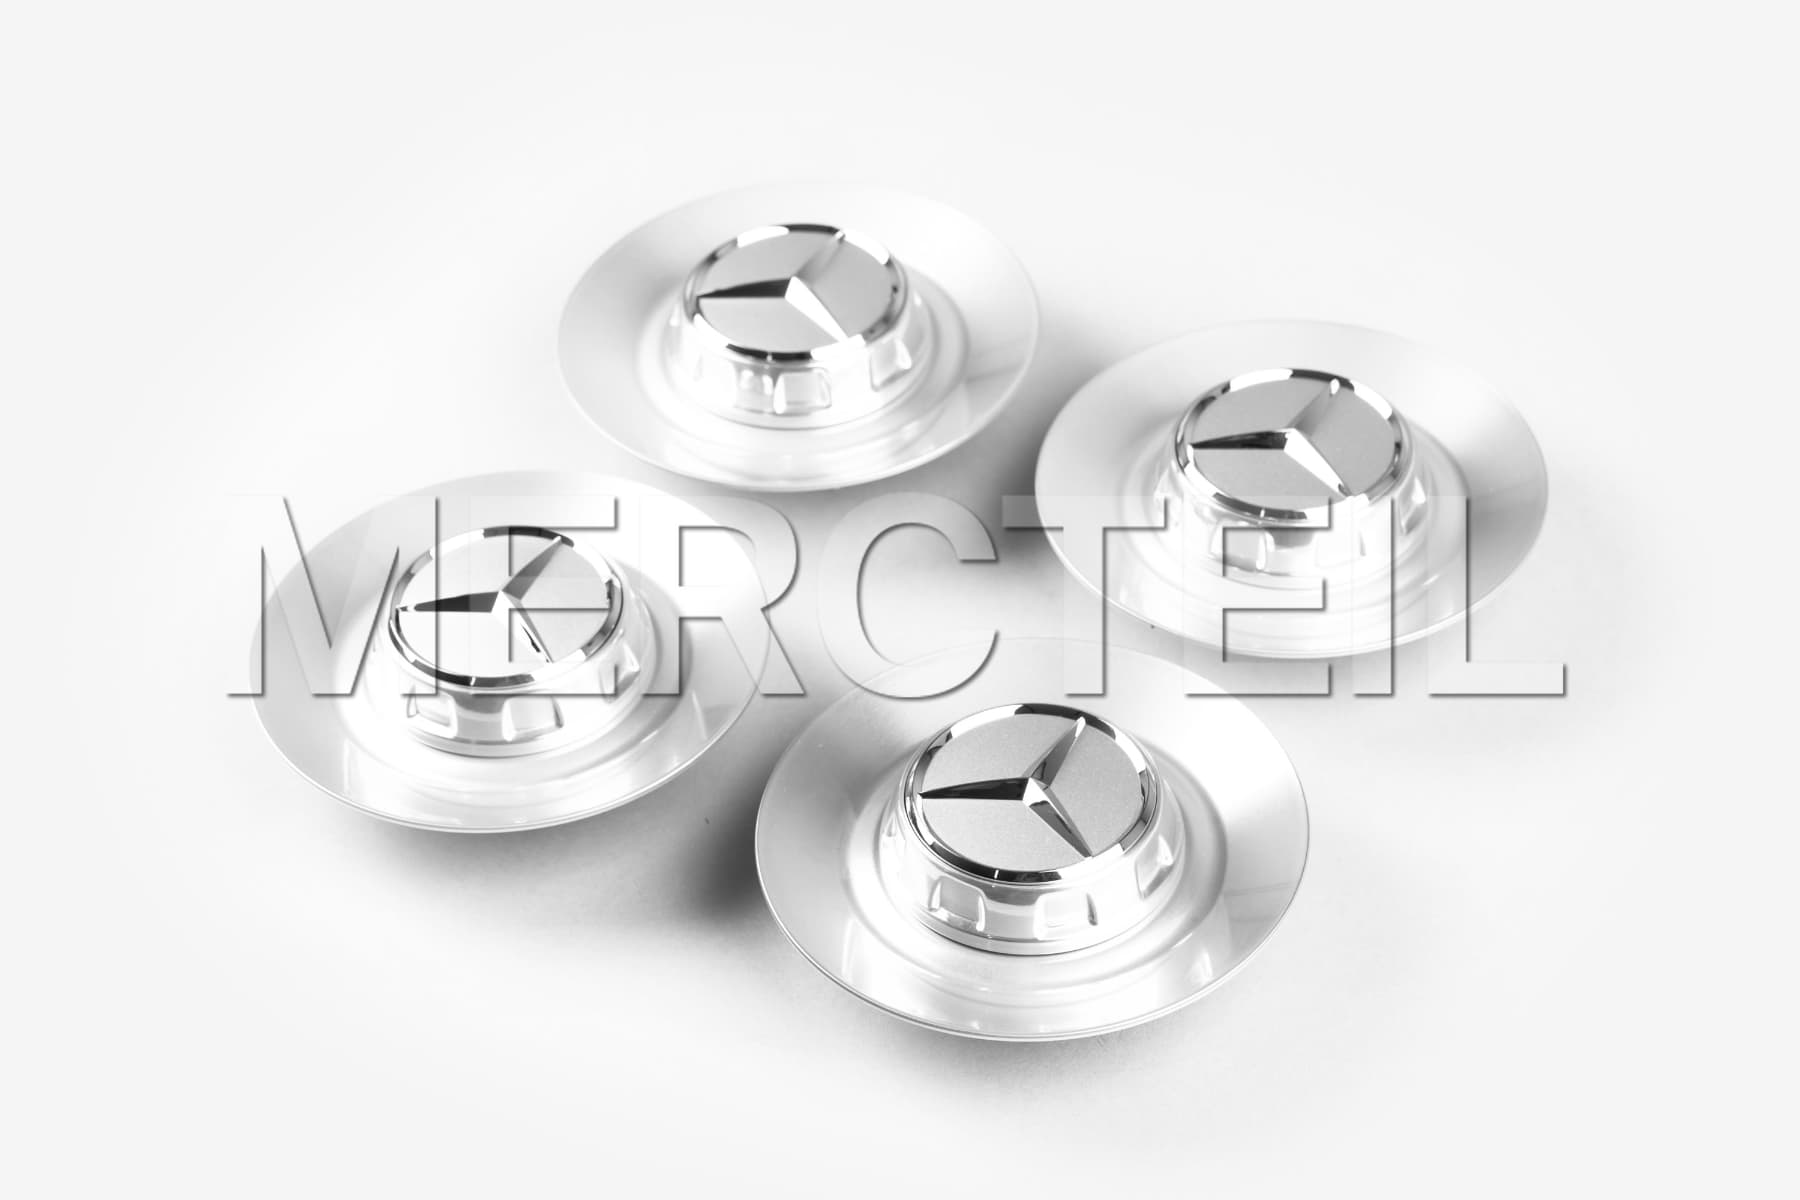 AMG Center Caps for S Class Forged Wheels Genuine Mercedes AMG (part number: 	
A22240028007756)